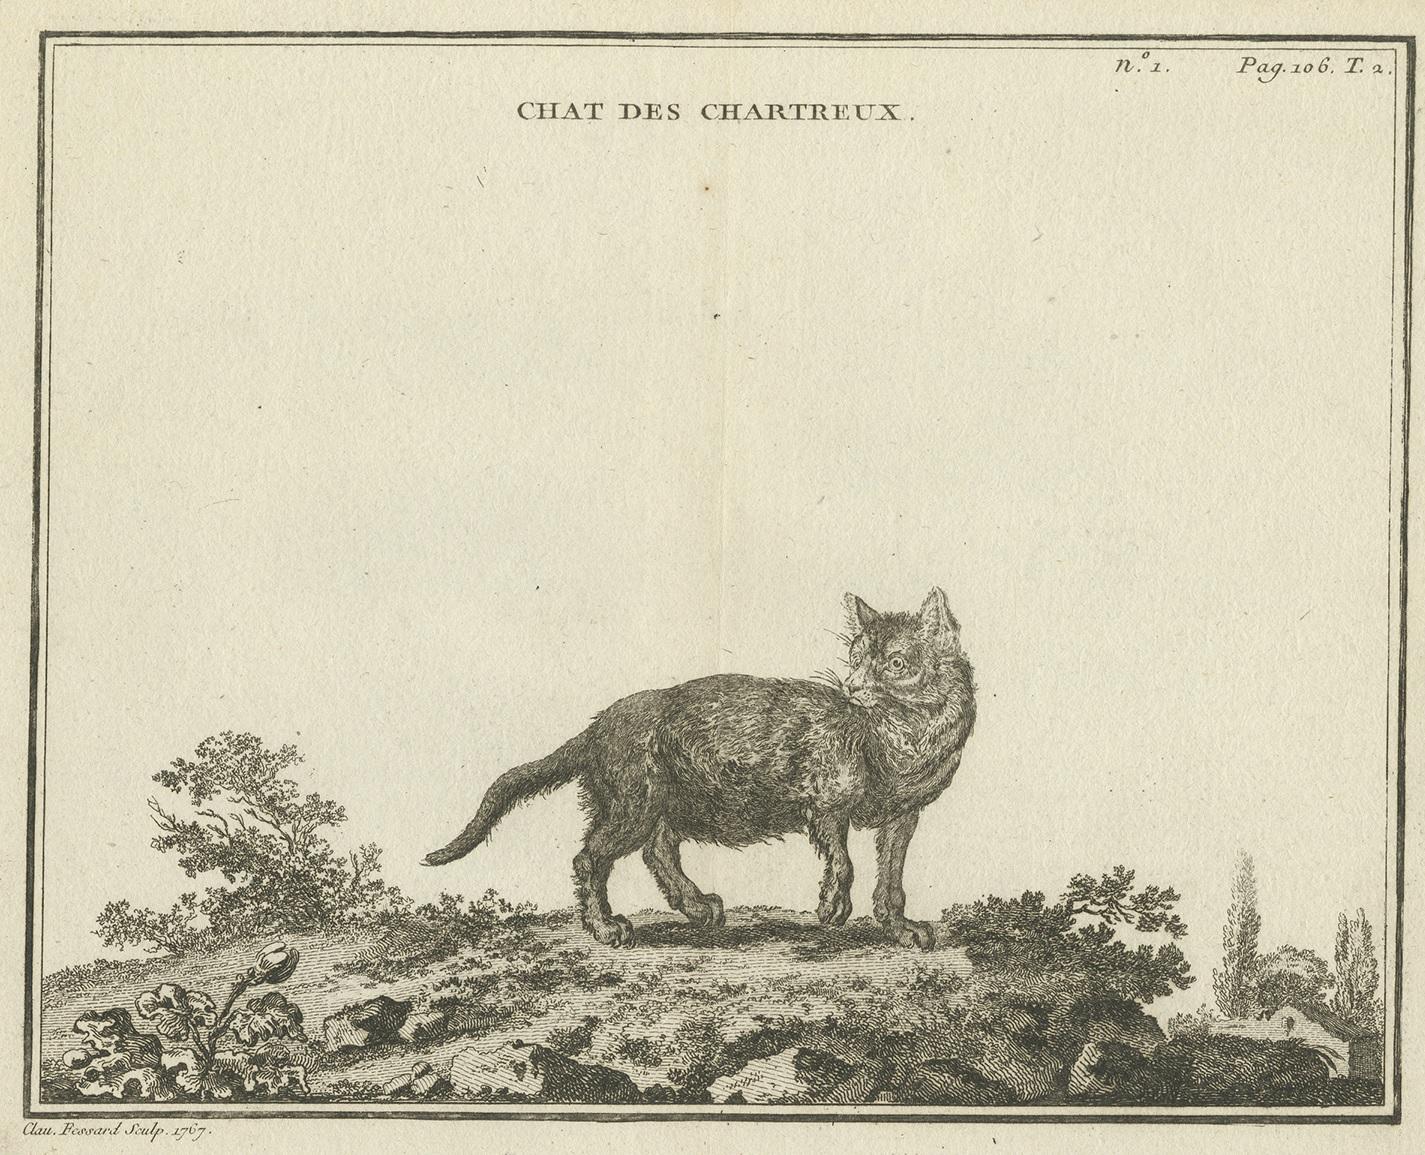 19th Century Antique Print of a Chartreux Cat by Fessard '1819'